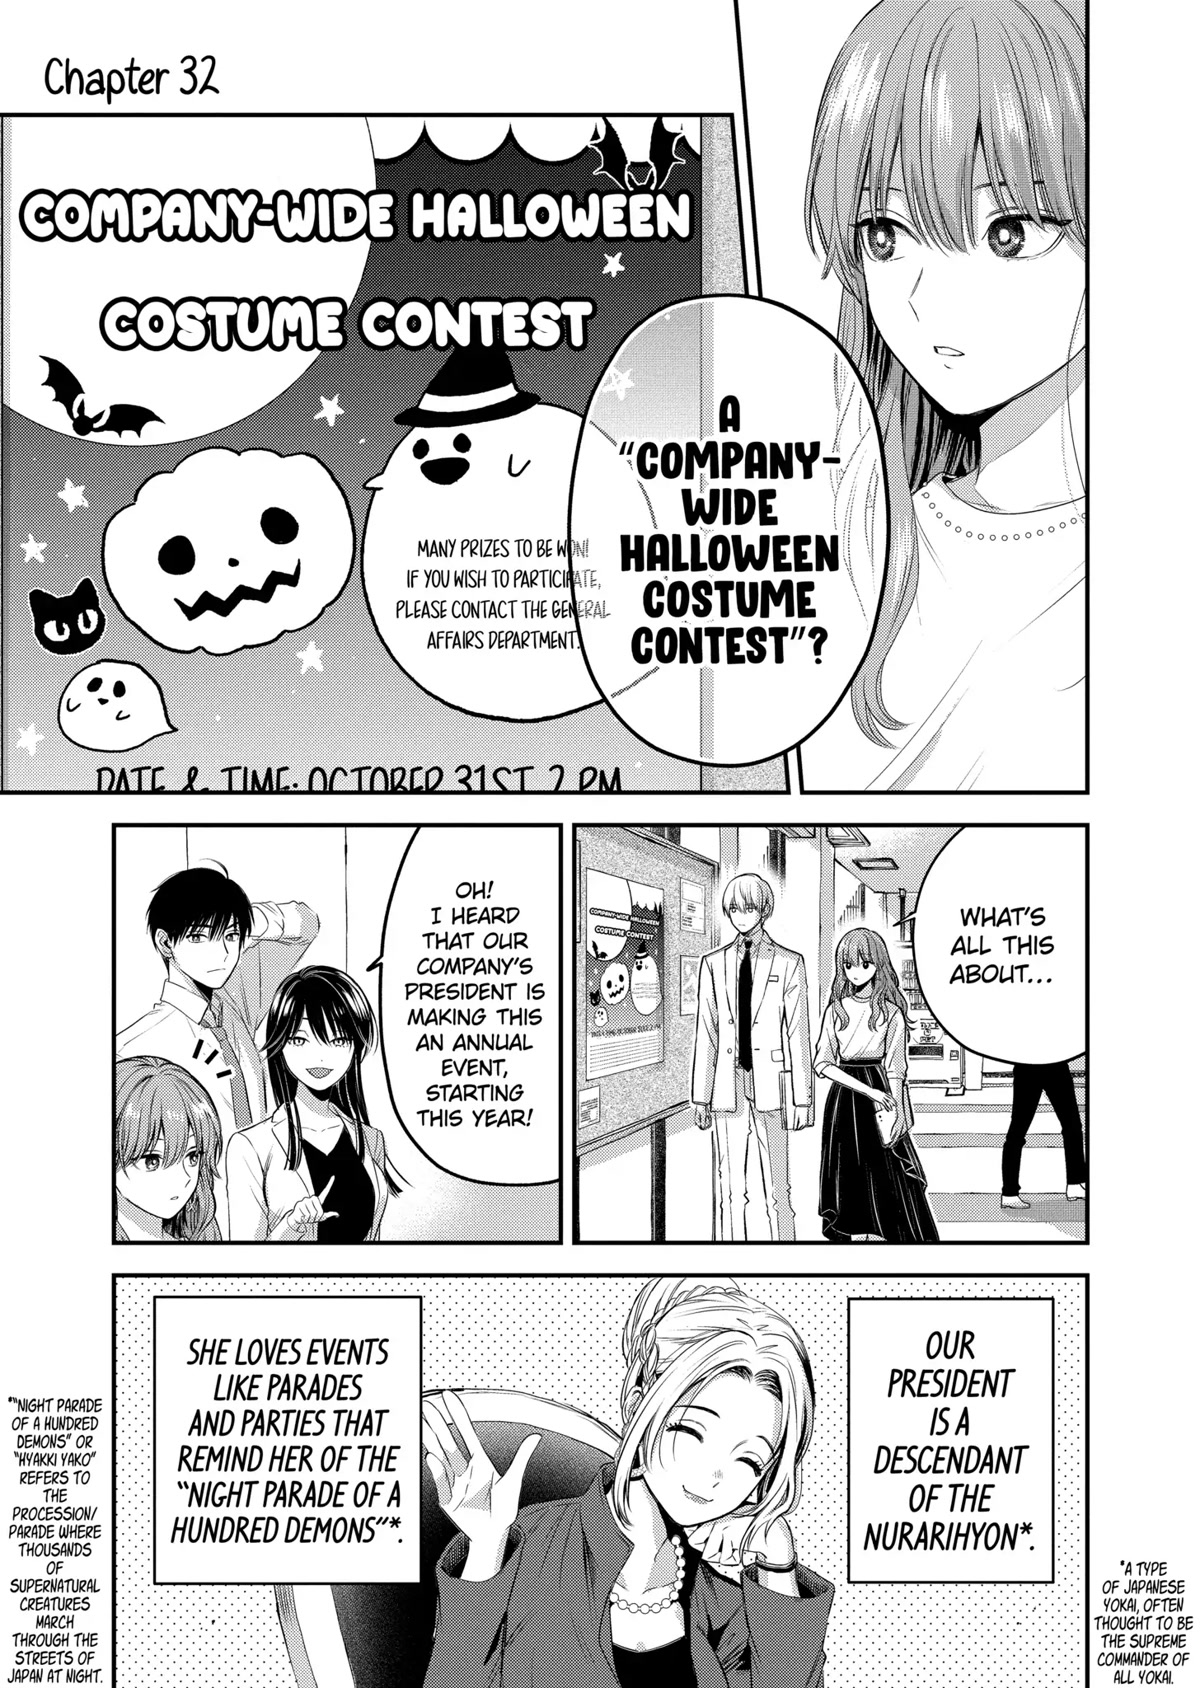 Ice Guy And The Cool Female Colleague - Page 1